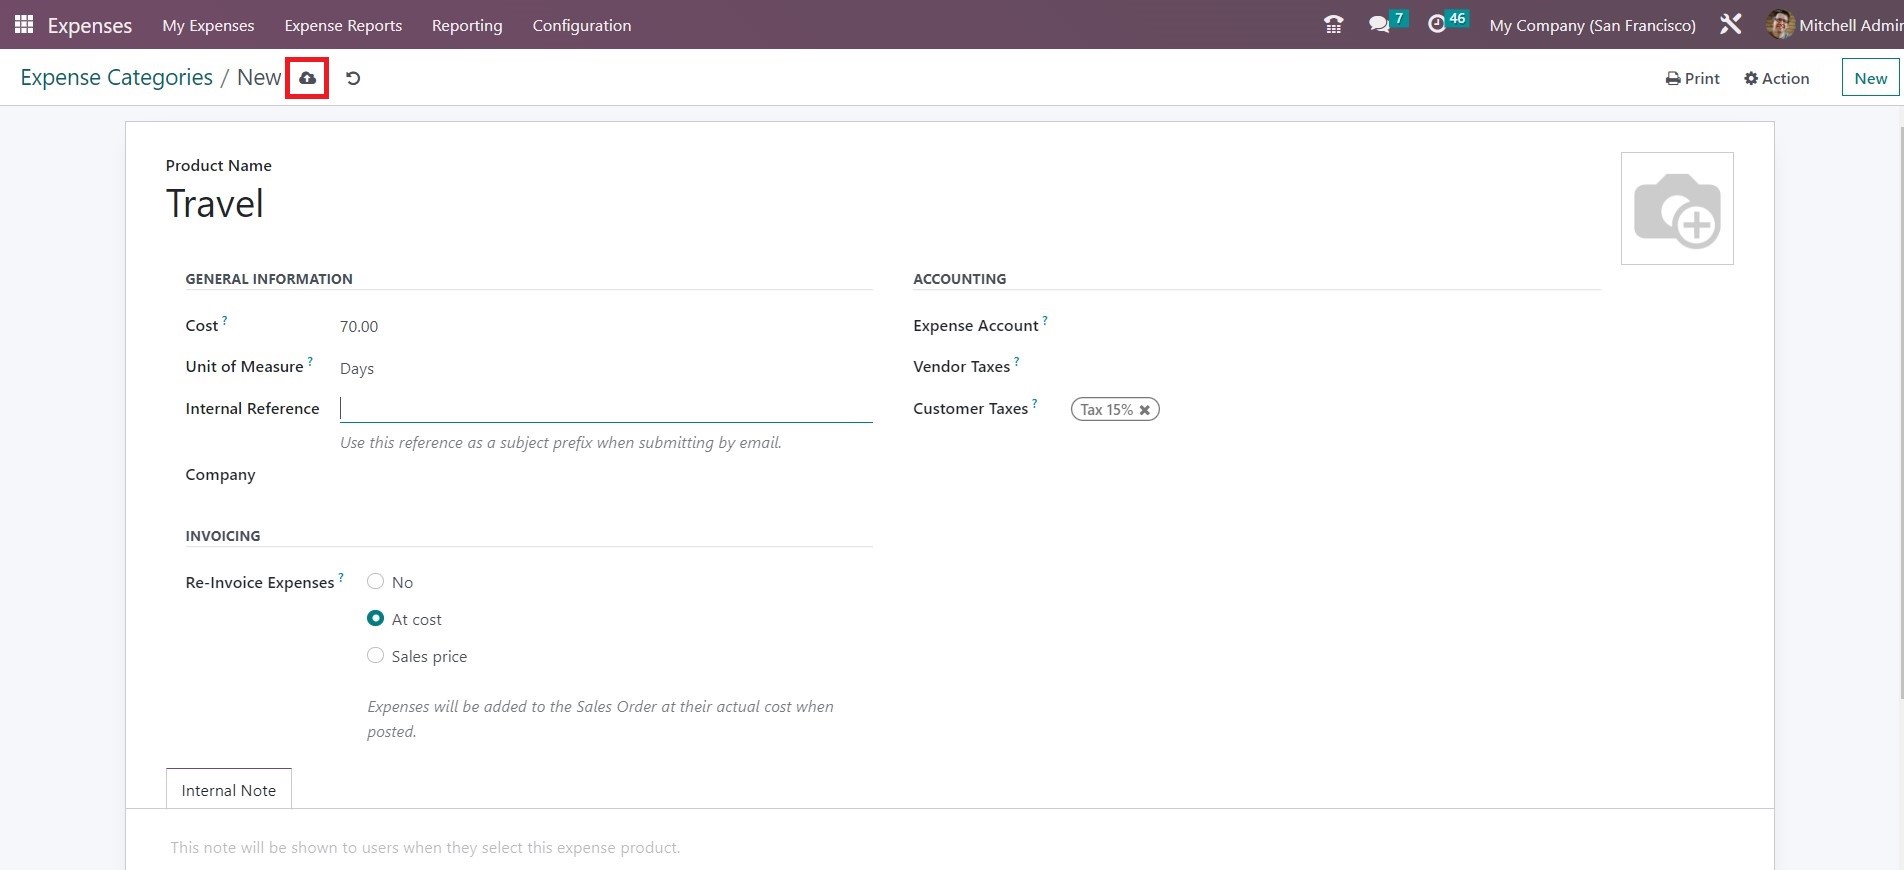 Reinvoicing Expenses To Customers in Odoo - 4- Midis